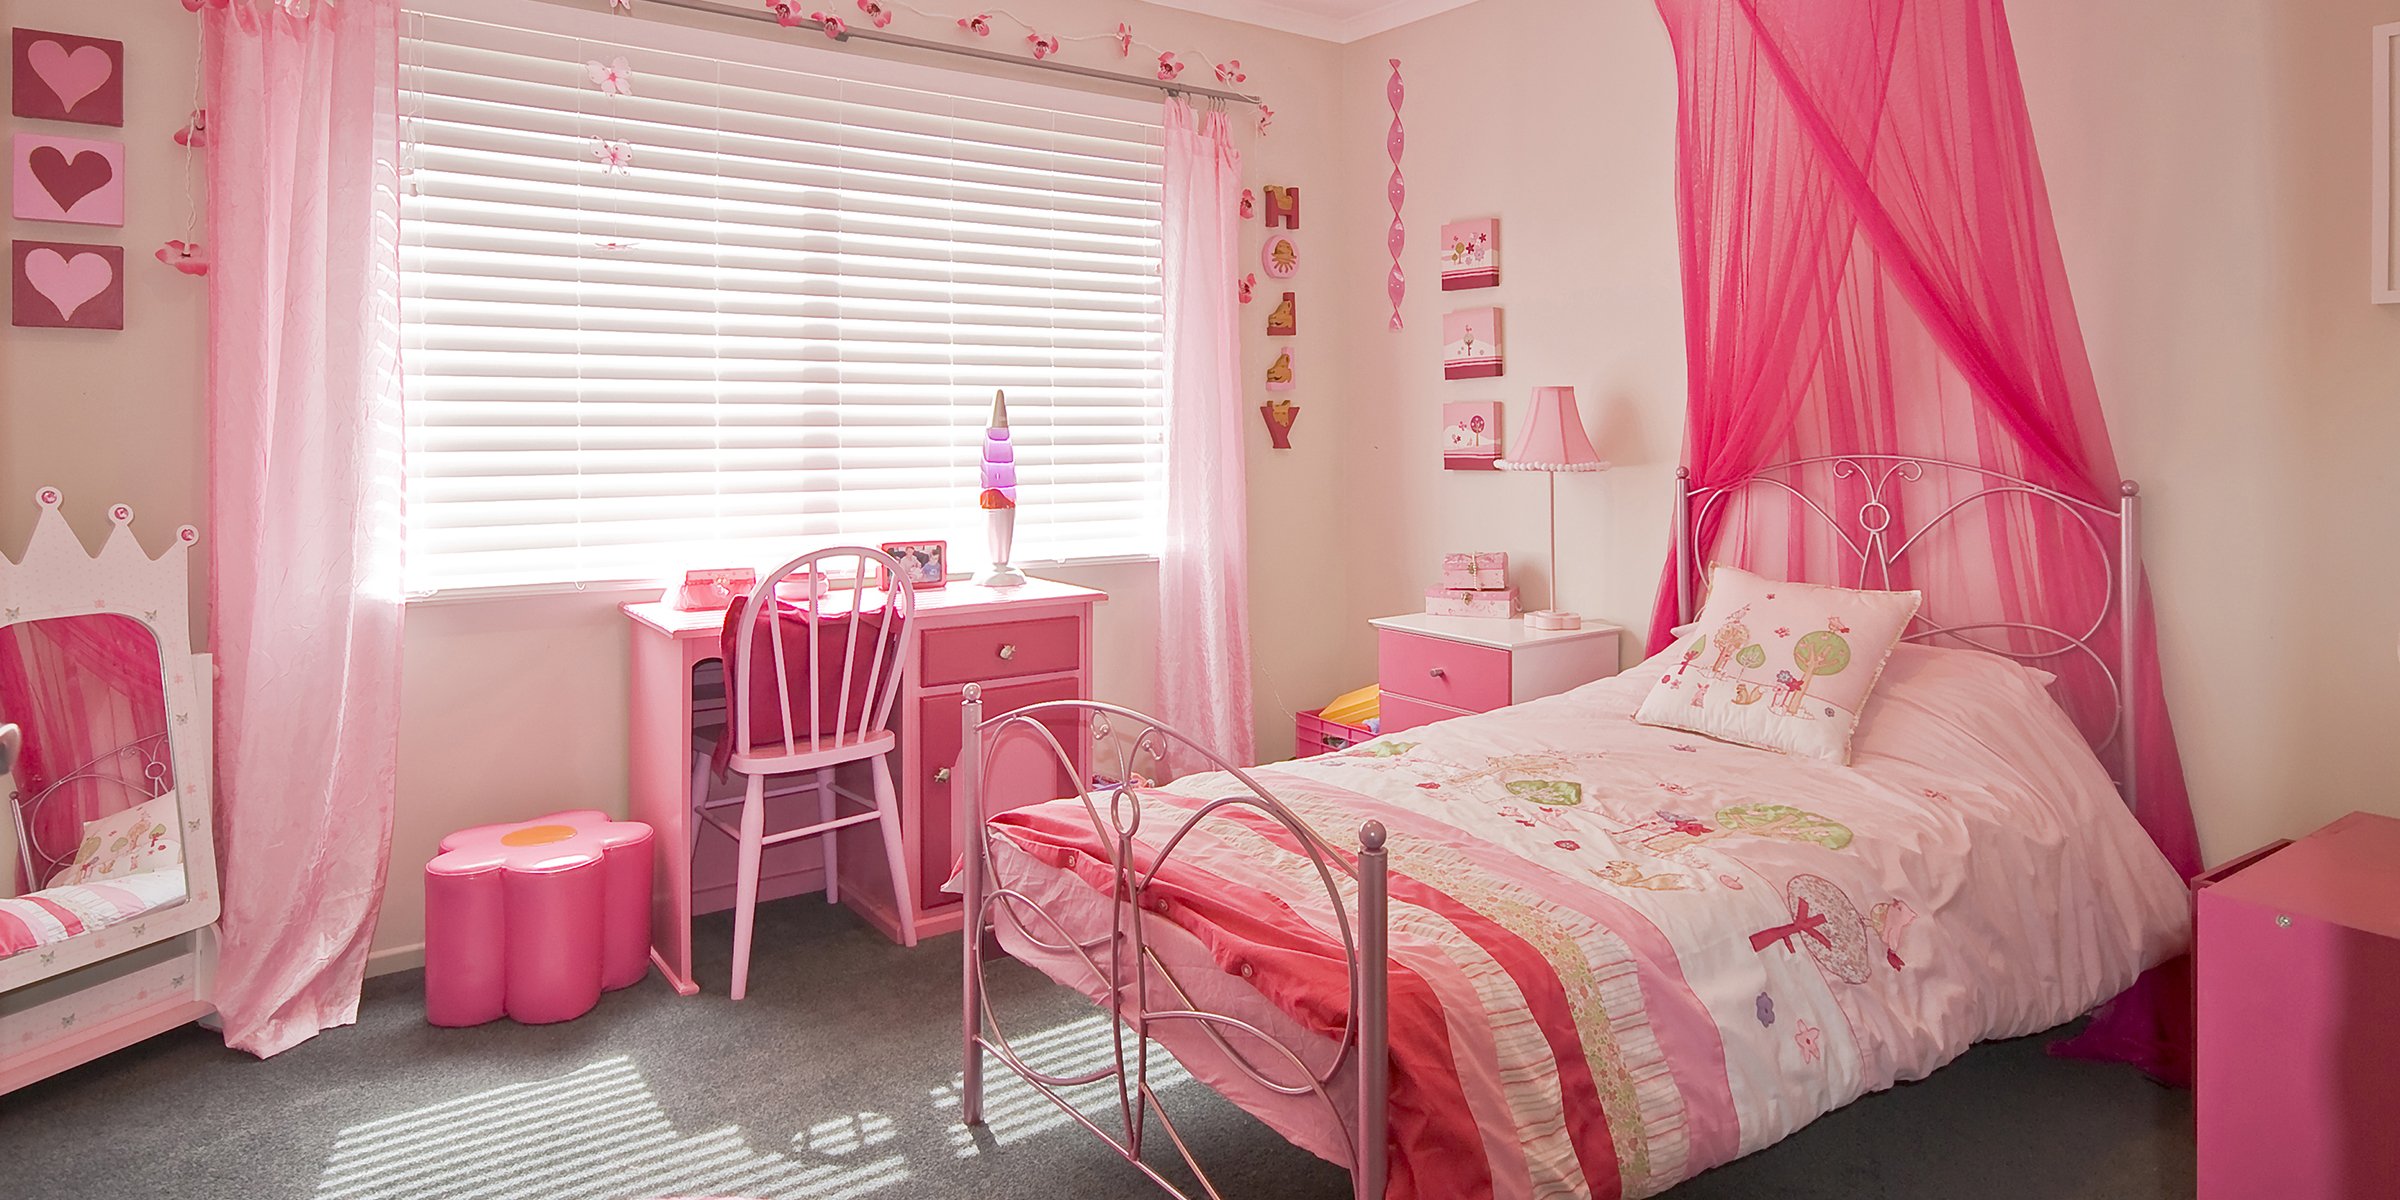 A lovely pink bedroom. | Source: Shutterstock